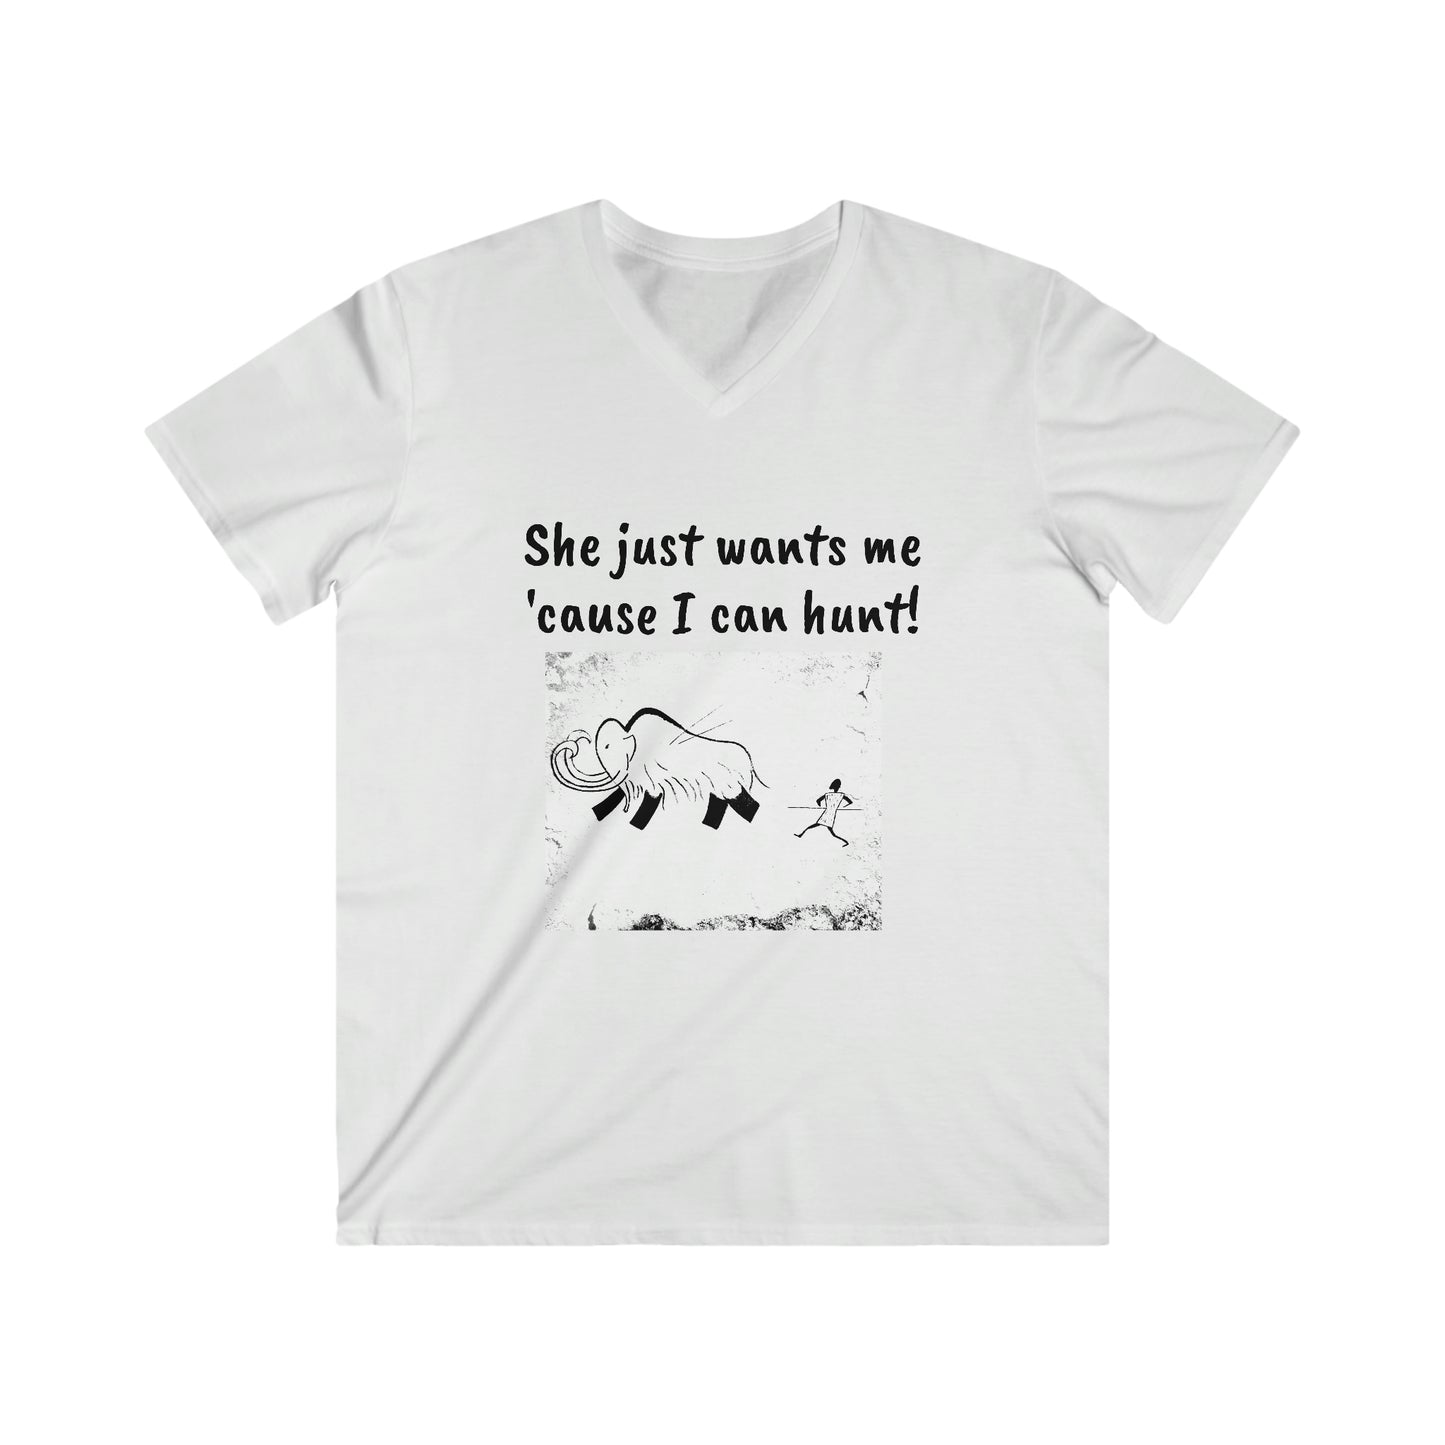 Roxy Rich Comedy "She just wants me 'cause I can hunt!" Men's Fitted V-Neck Short Sleeve Tee